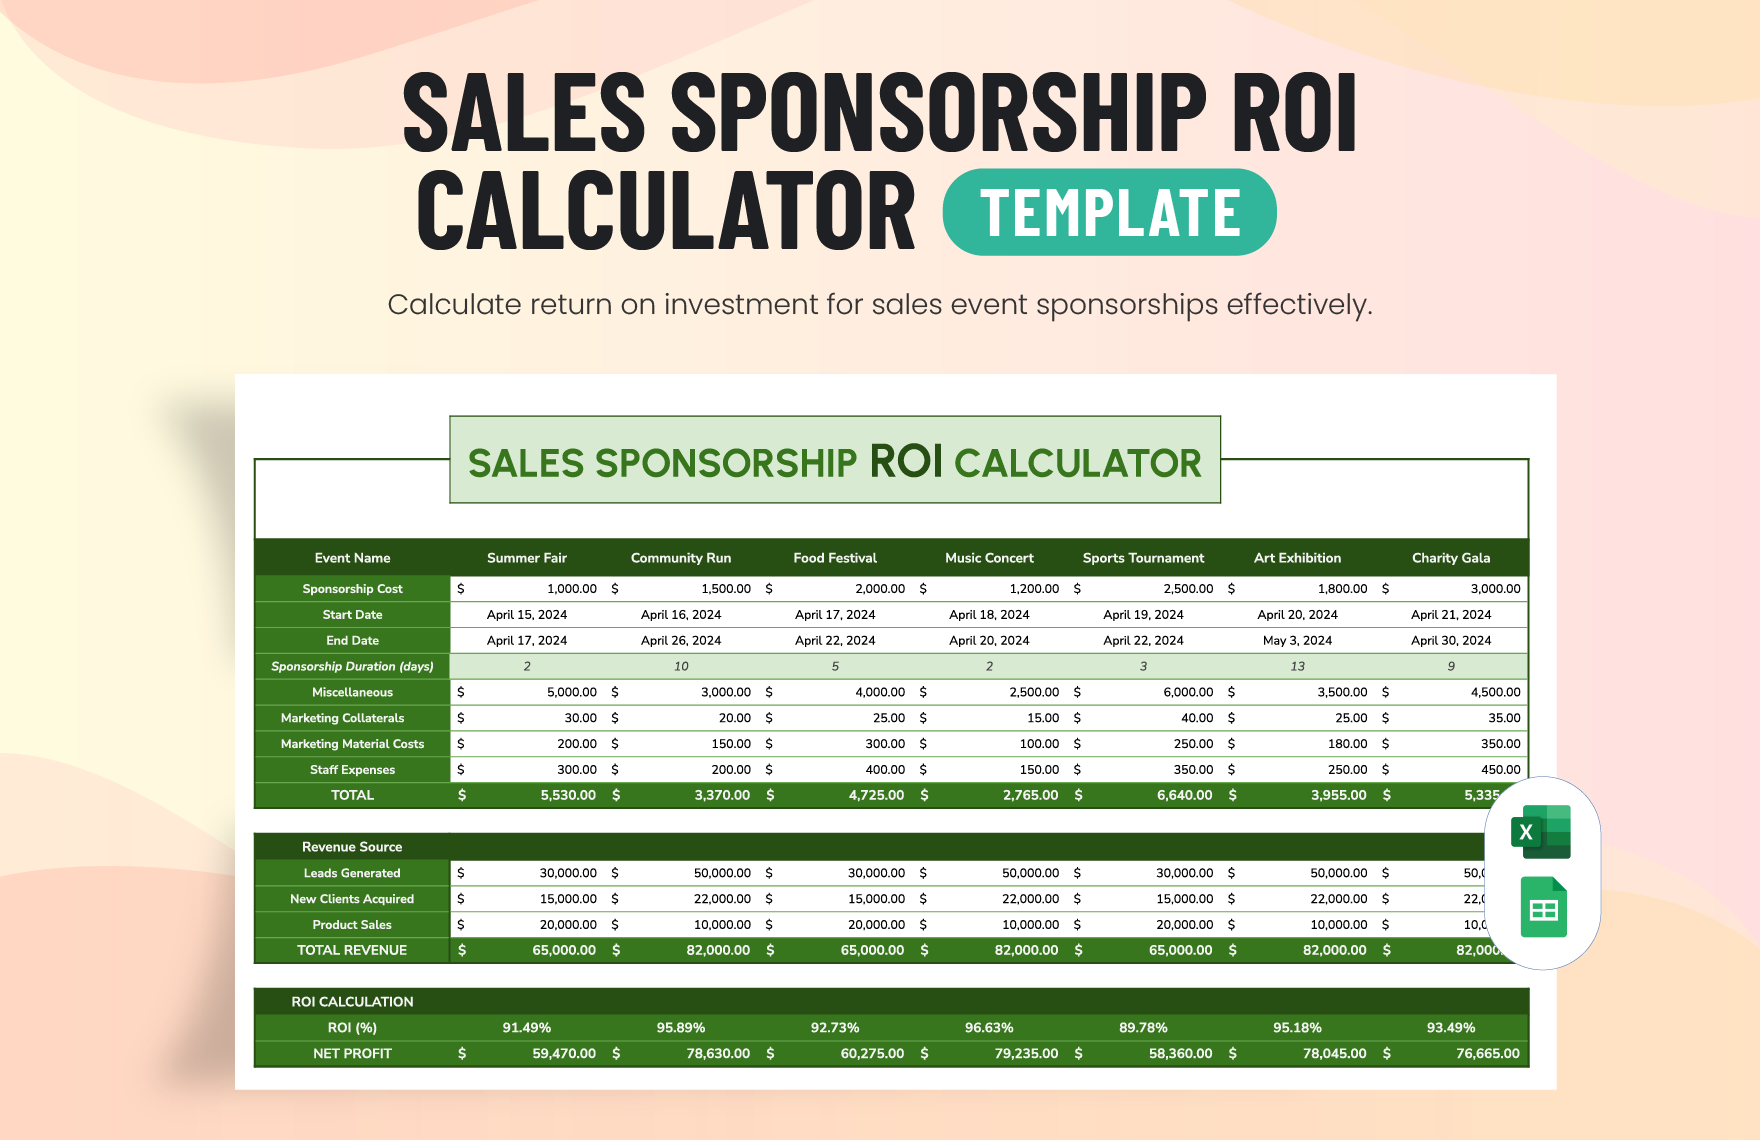 Sales Sponsorship ROI Calculator Template in Excel, Google Sheets